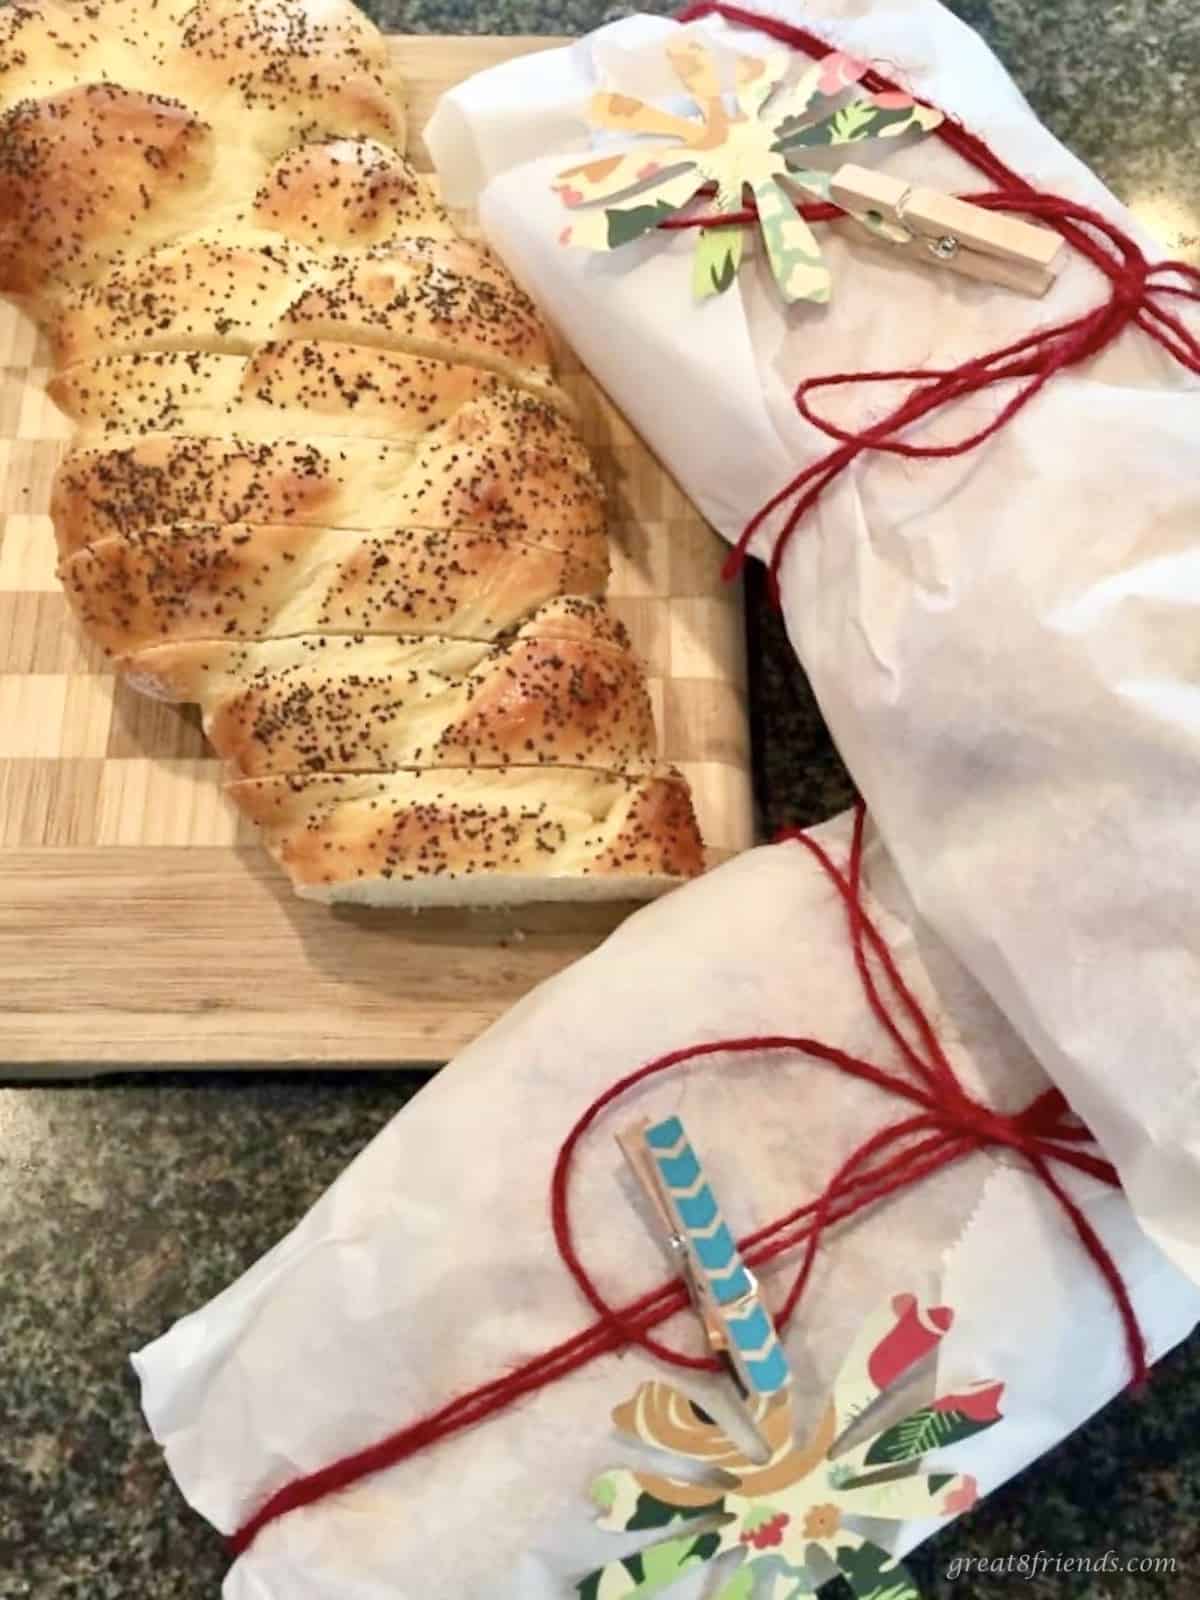 Three loaves of challah bread with two of them wrapped in white paper for a holiday gift.